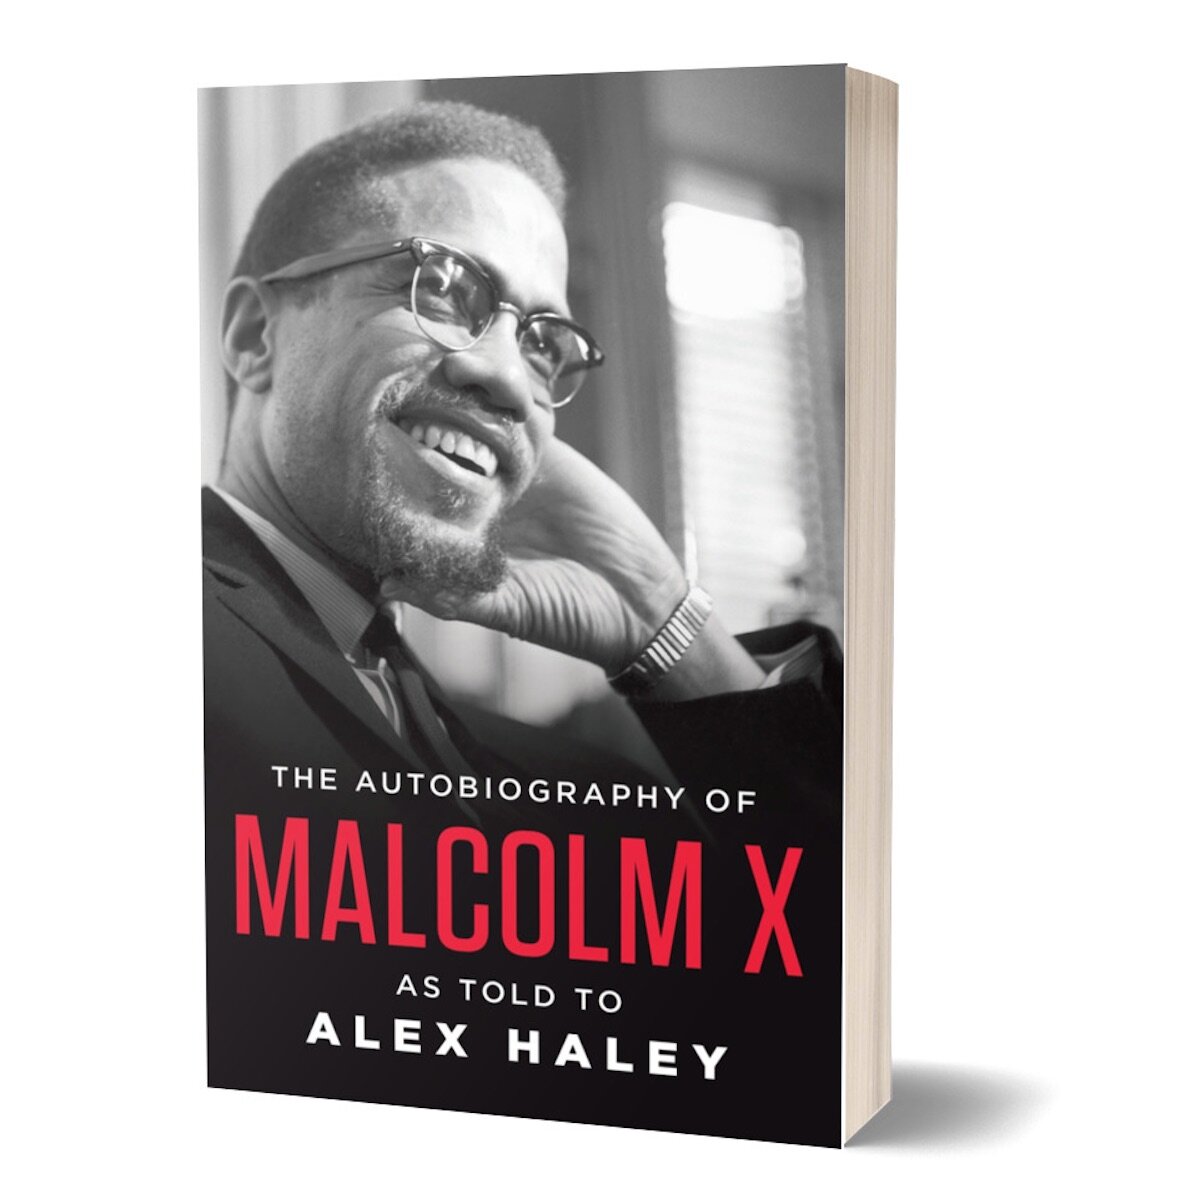 “The Autobiography of Malcolm X” with Alex Haley (1964)